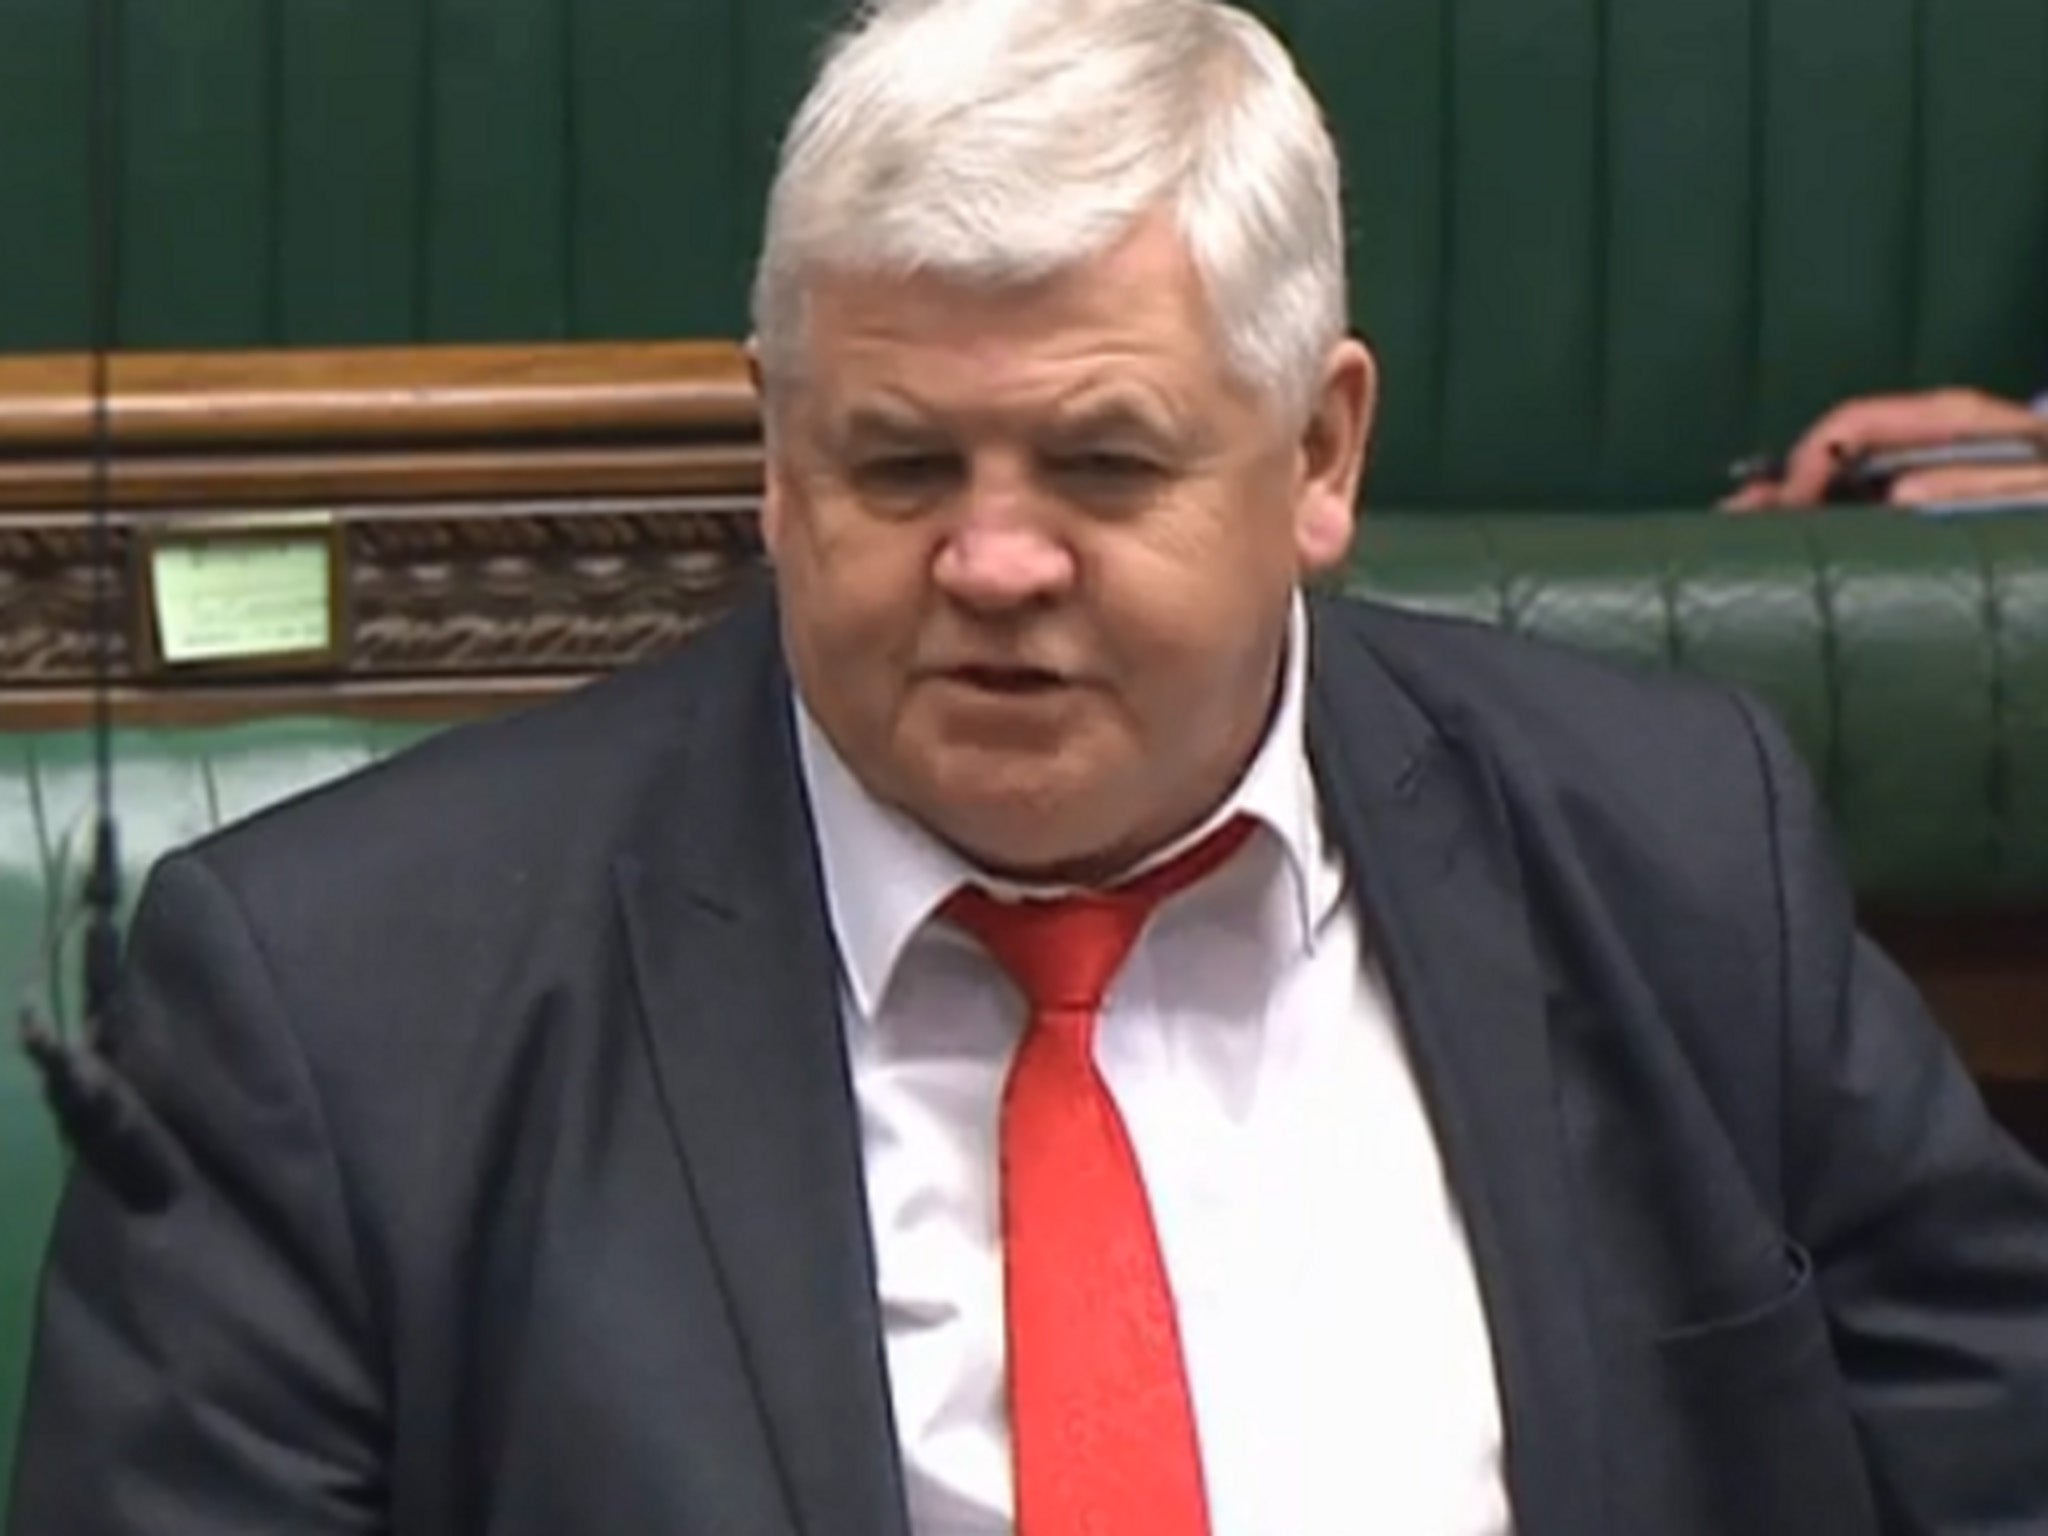 Scottish Labour MP Hugh Gaffney has been reprimanded - but not suspended